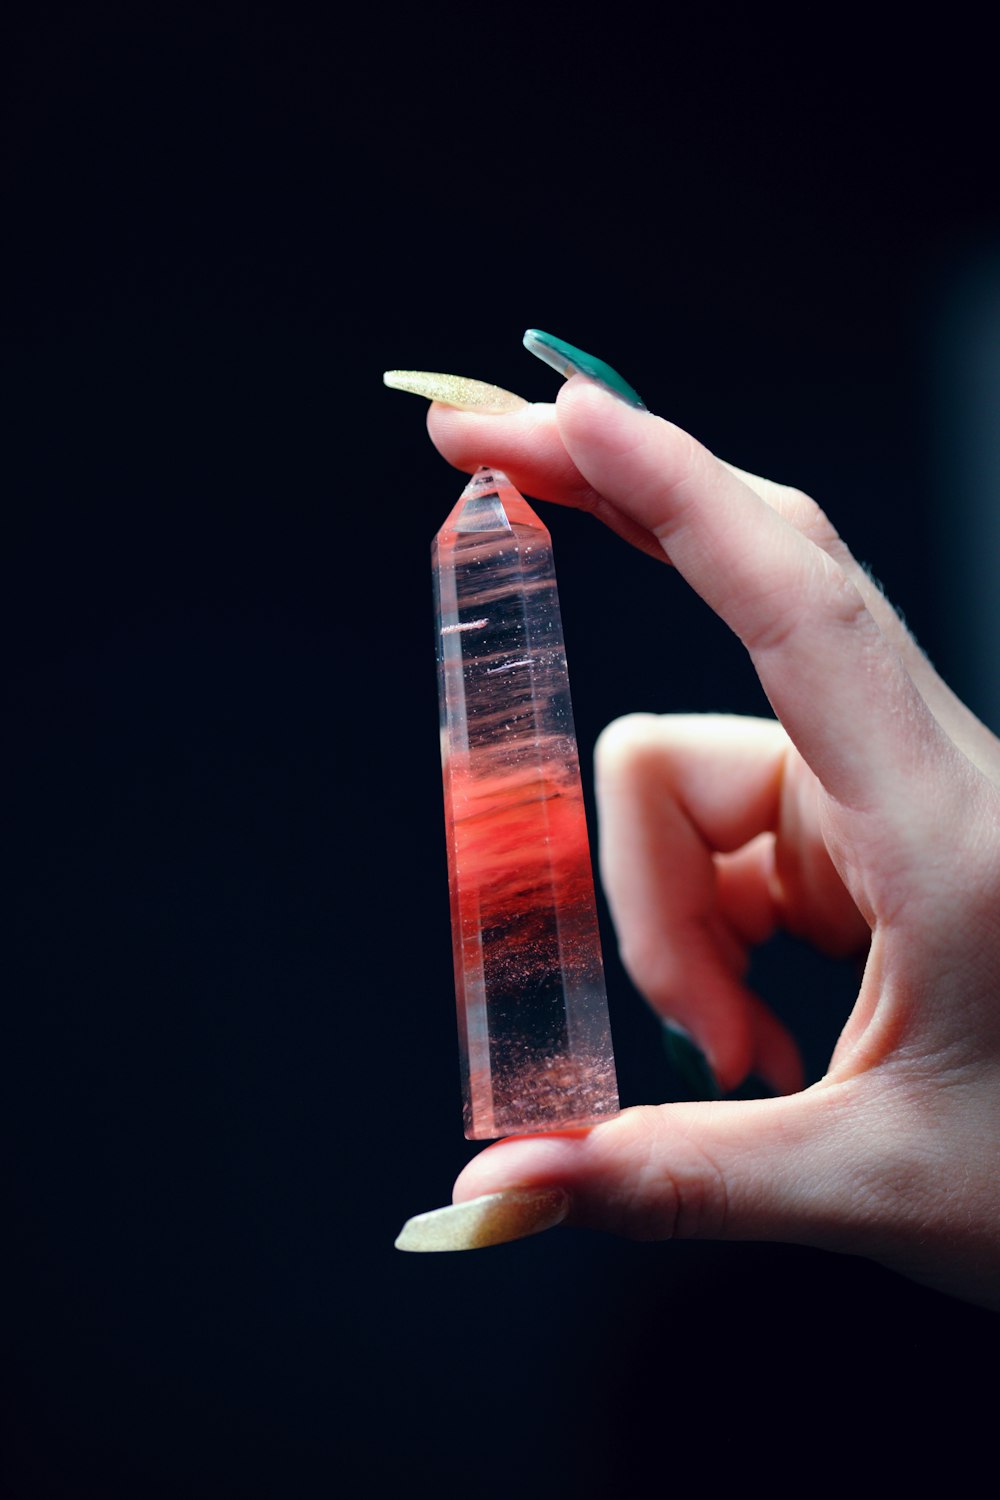 person holding red and black crystal